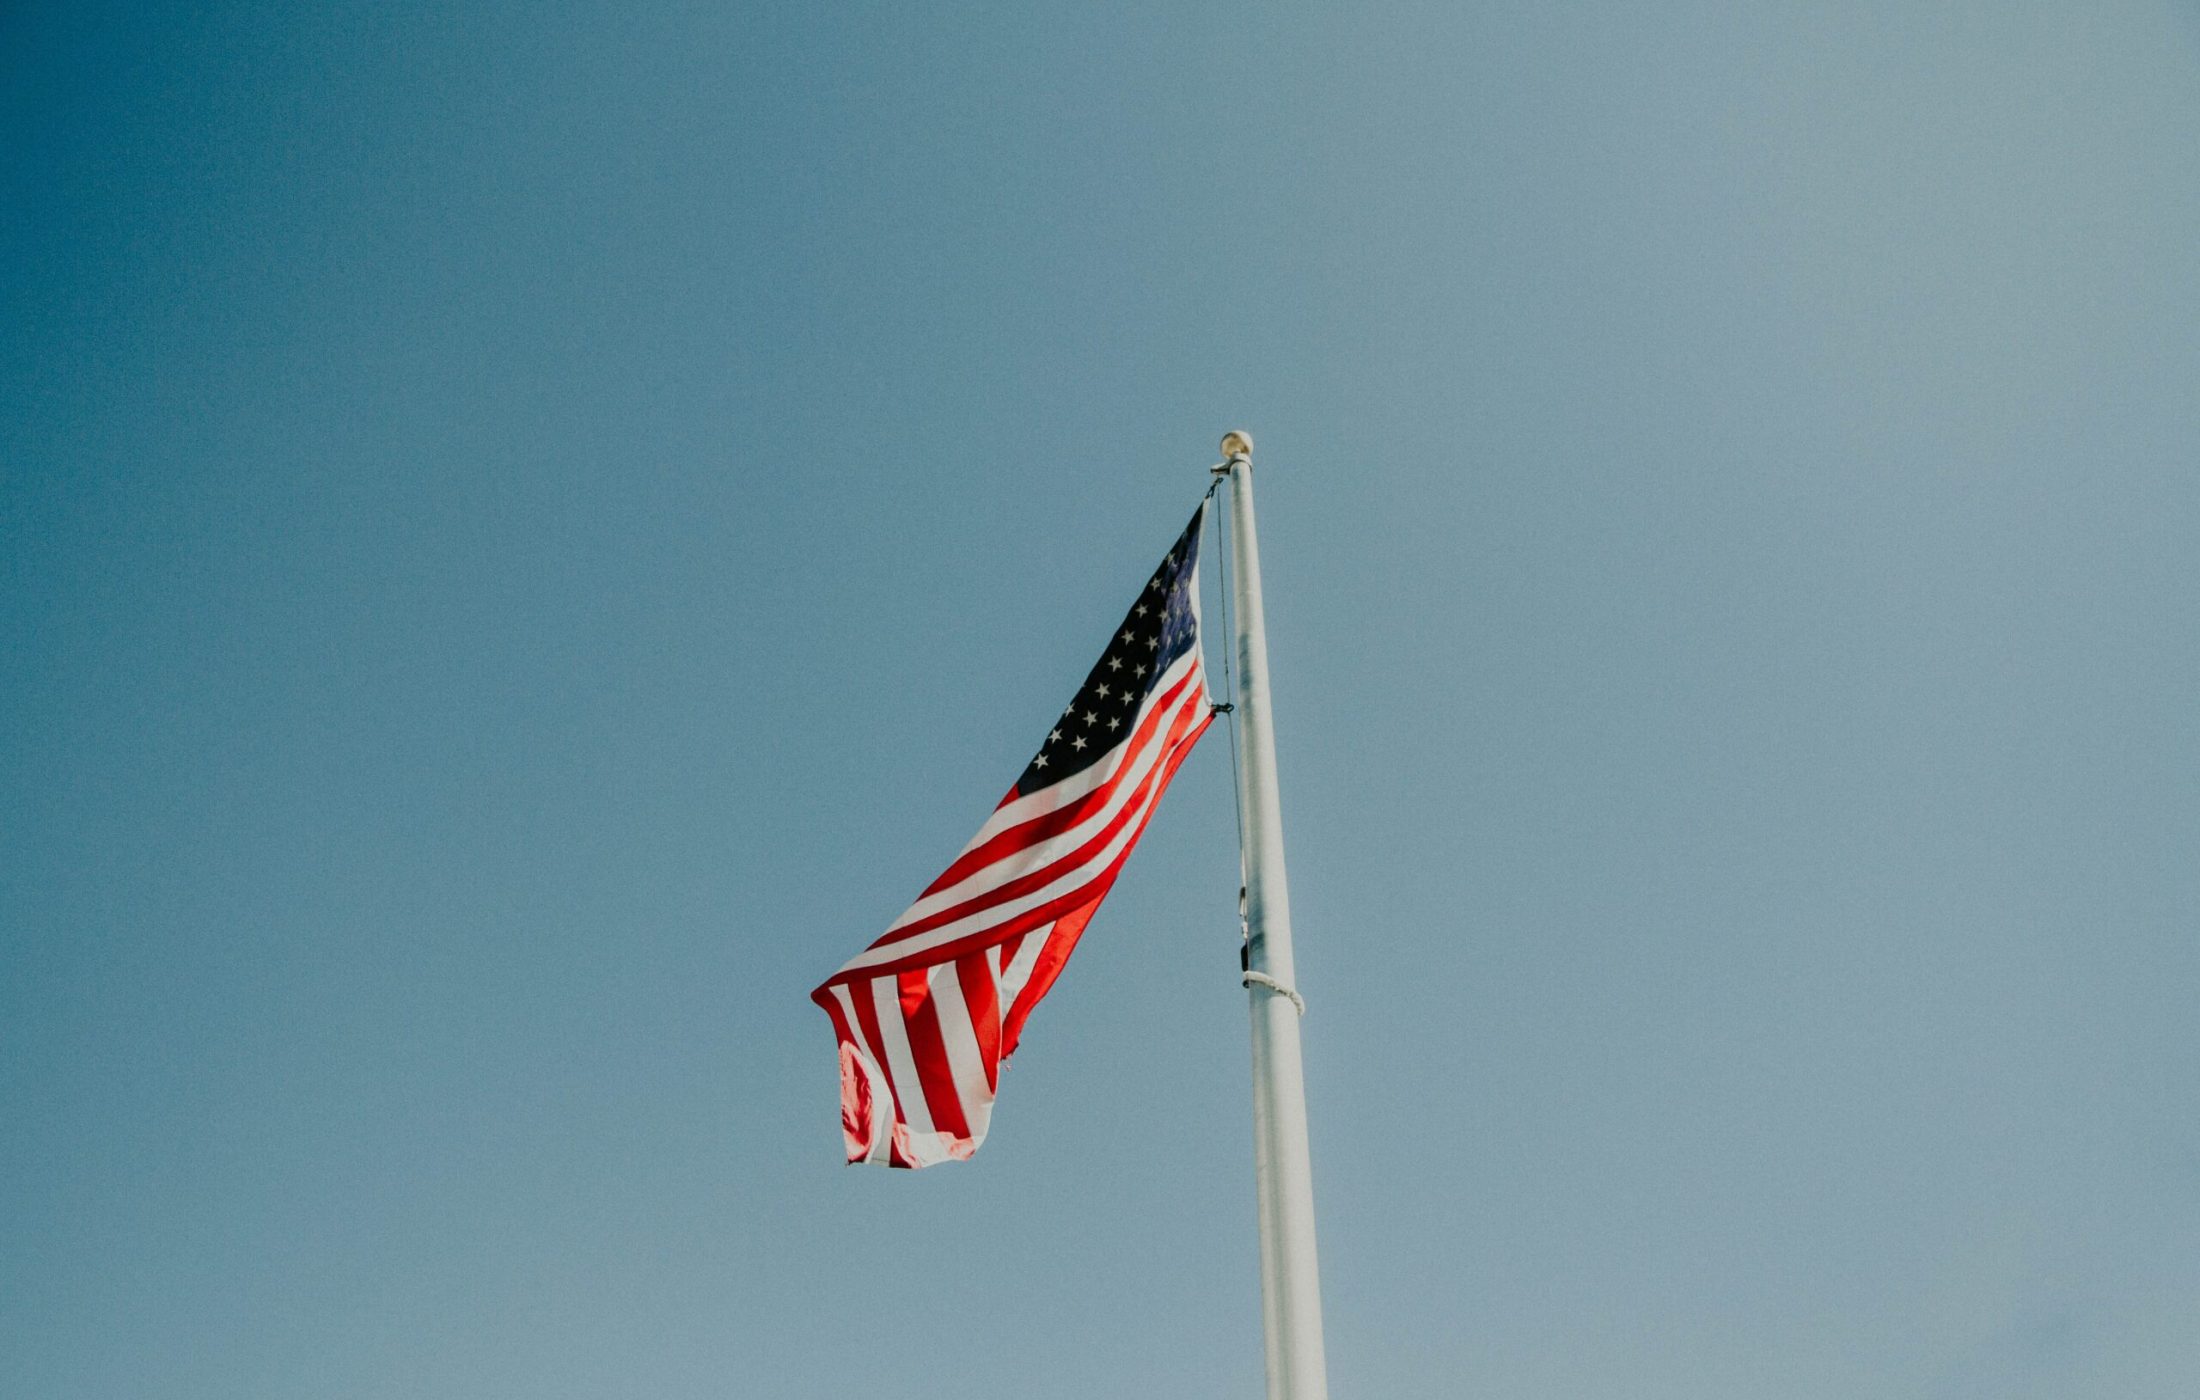 American flag waving in the wind against clear light blue sky